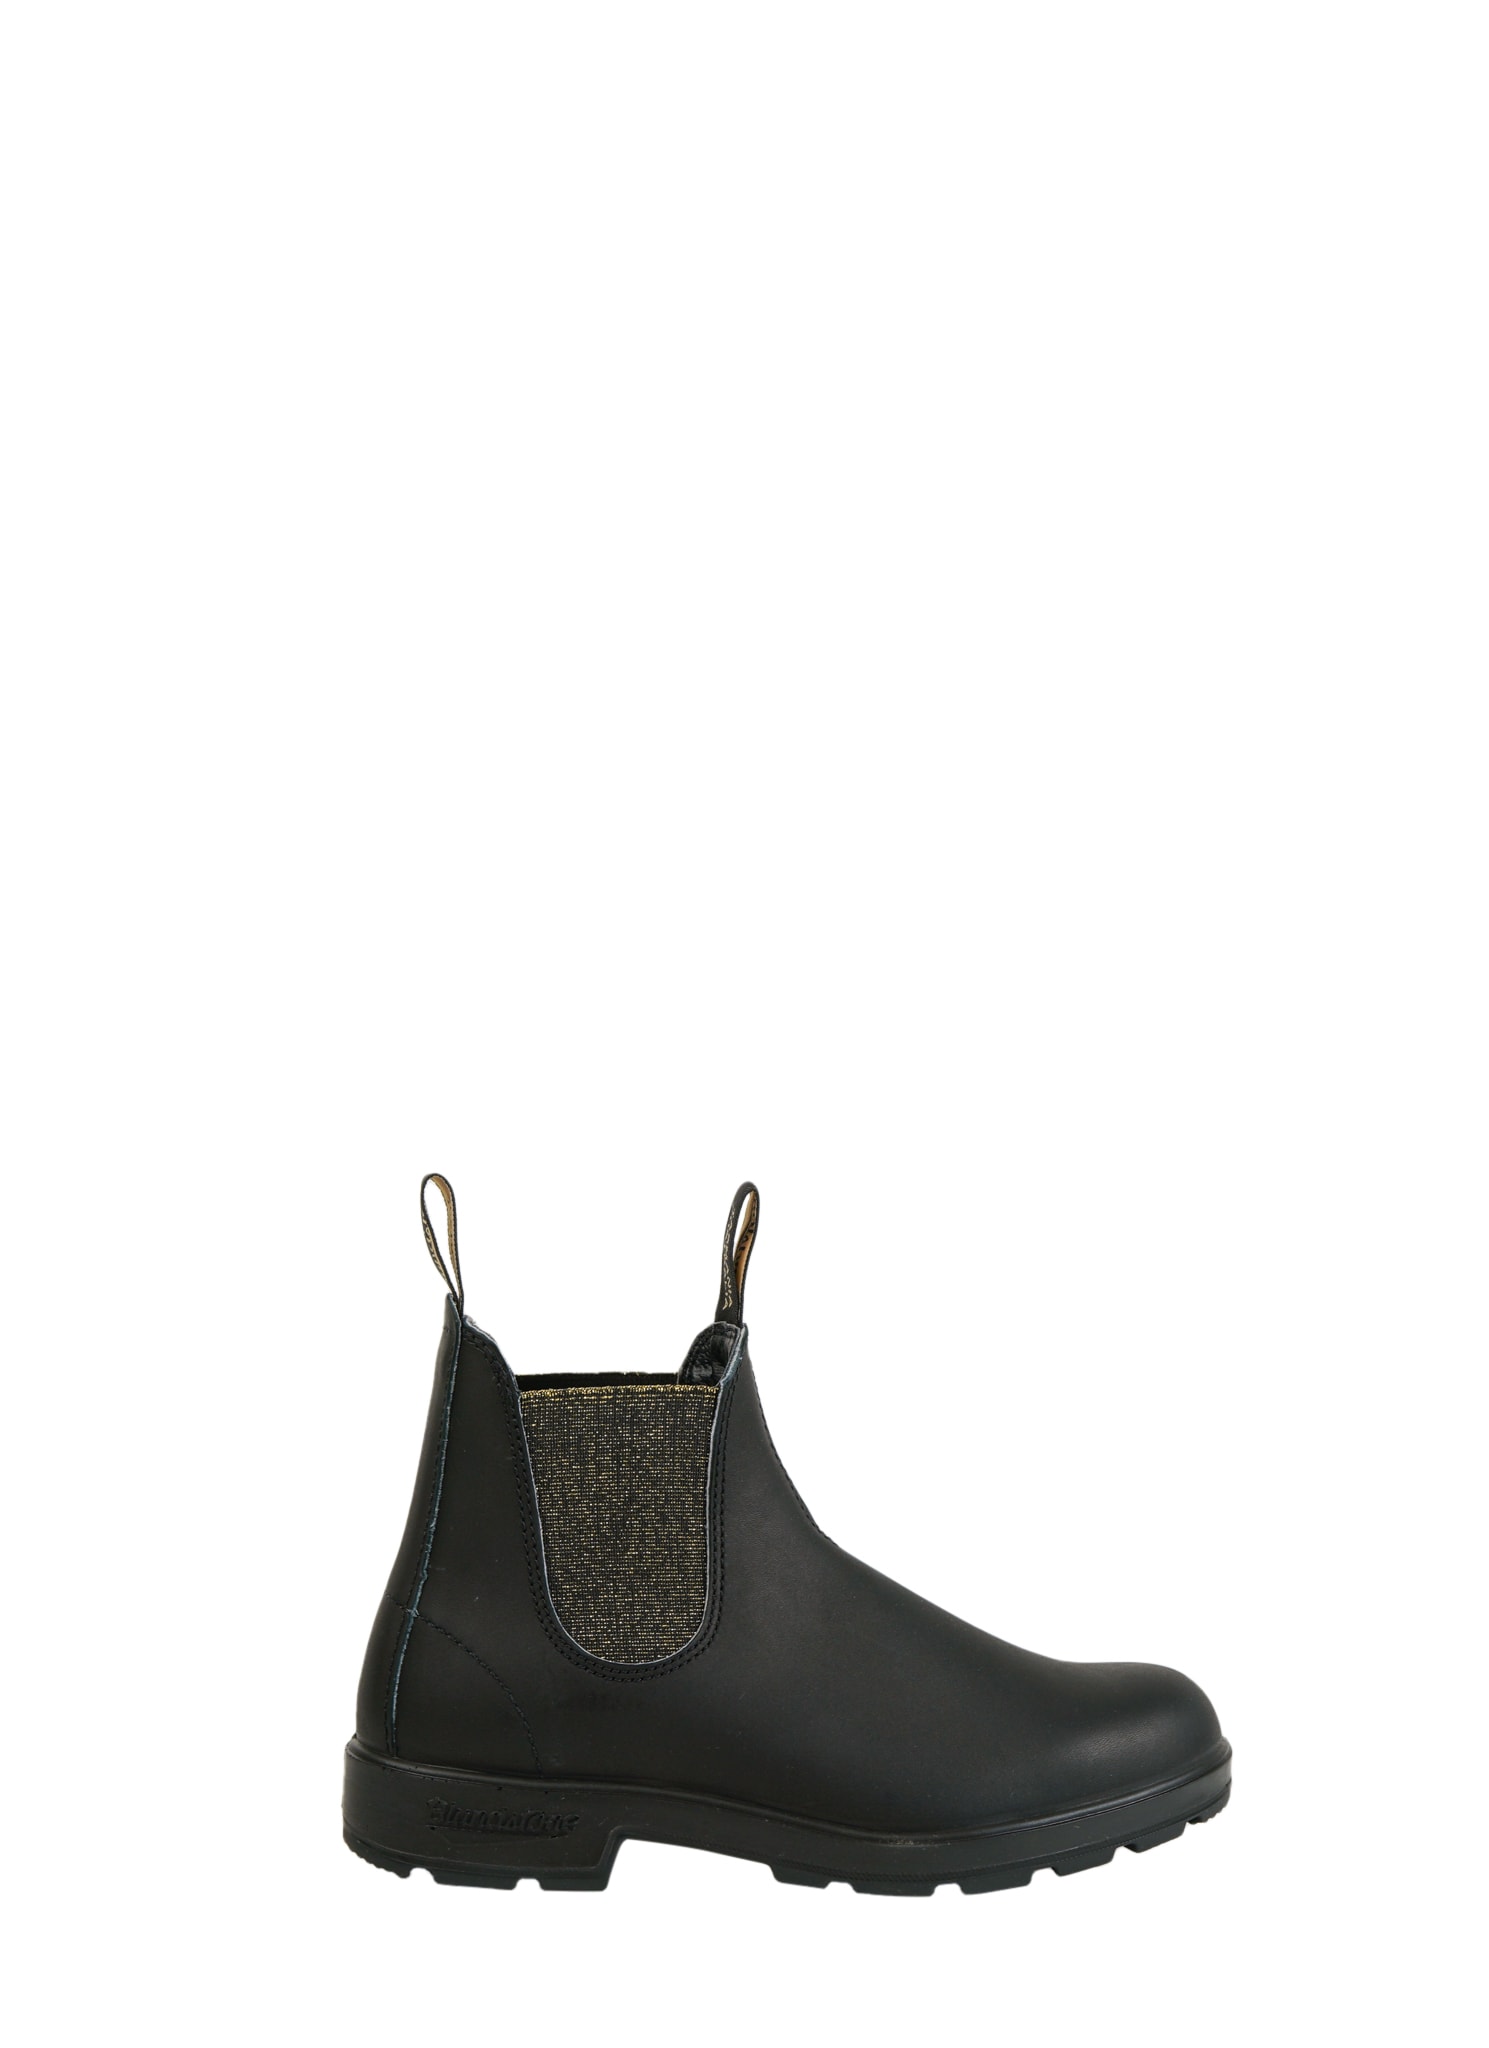 Blundstone Leather Boots